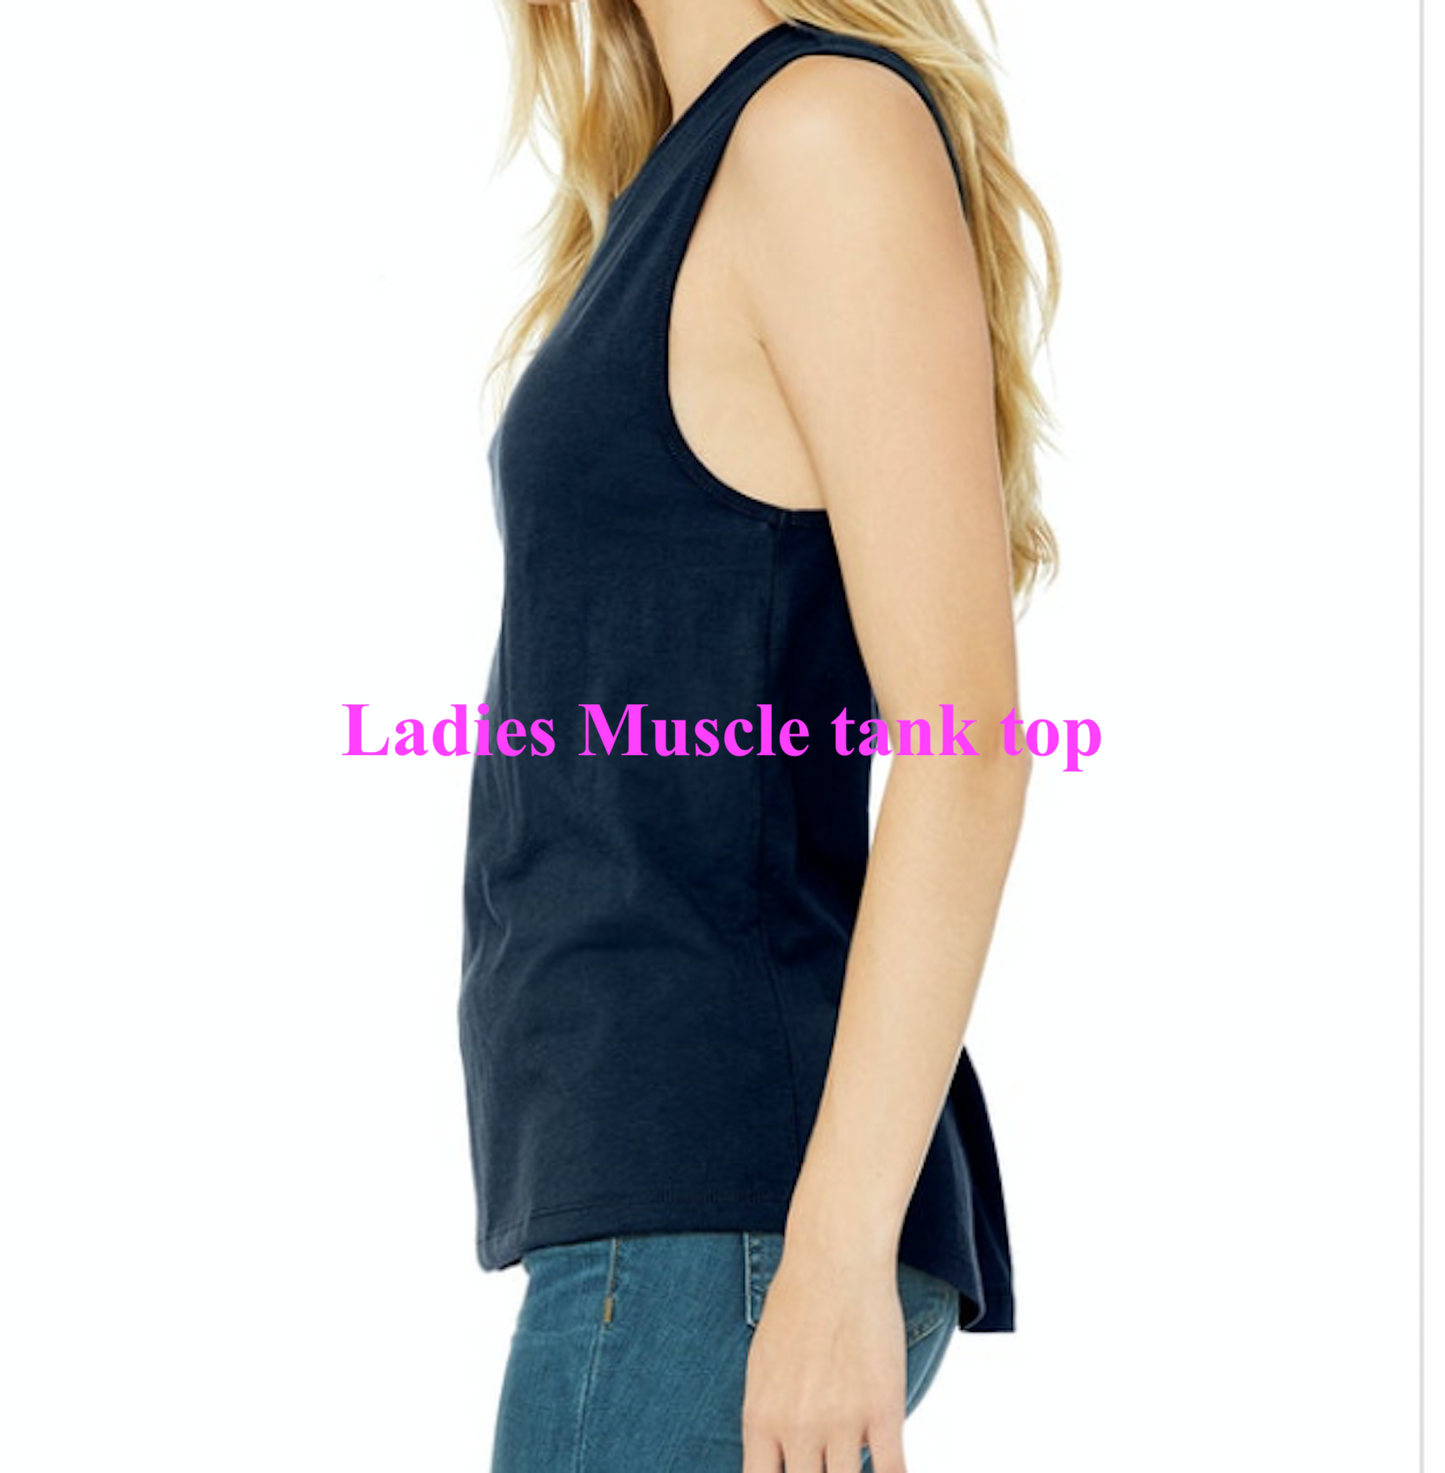 Suck It Up Buttercup Muscle Tank Top